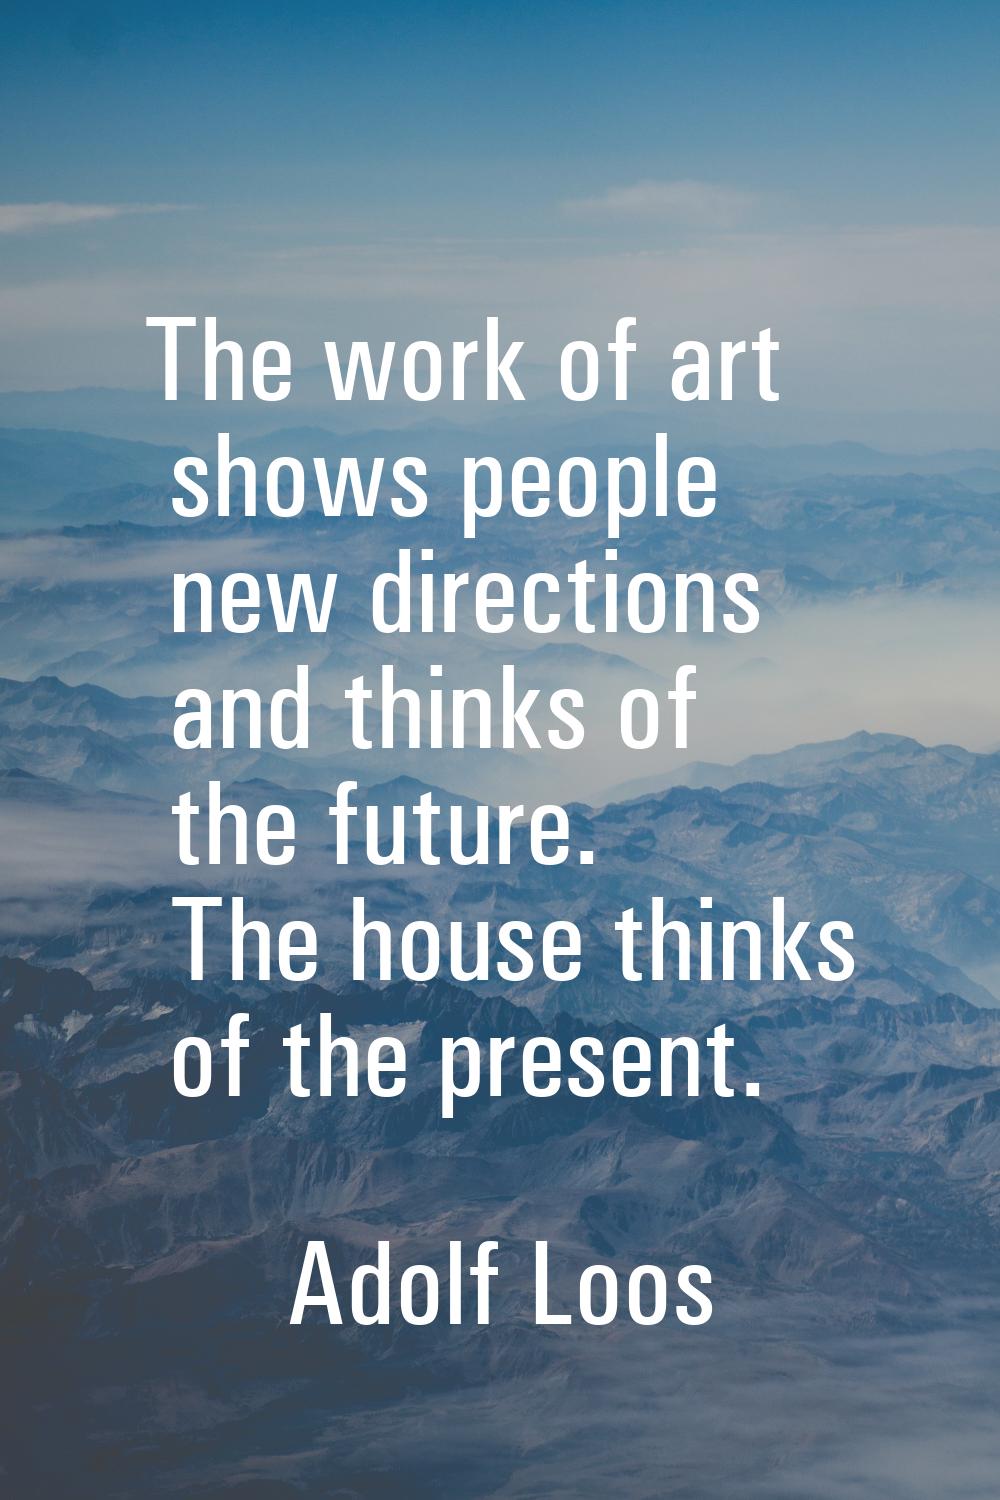 The work of art shows people new directions and thinks of the future. The house thinks of the prese